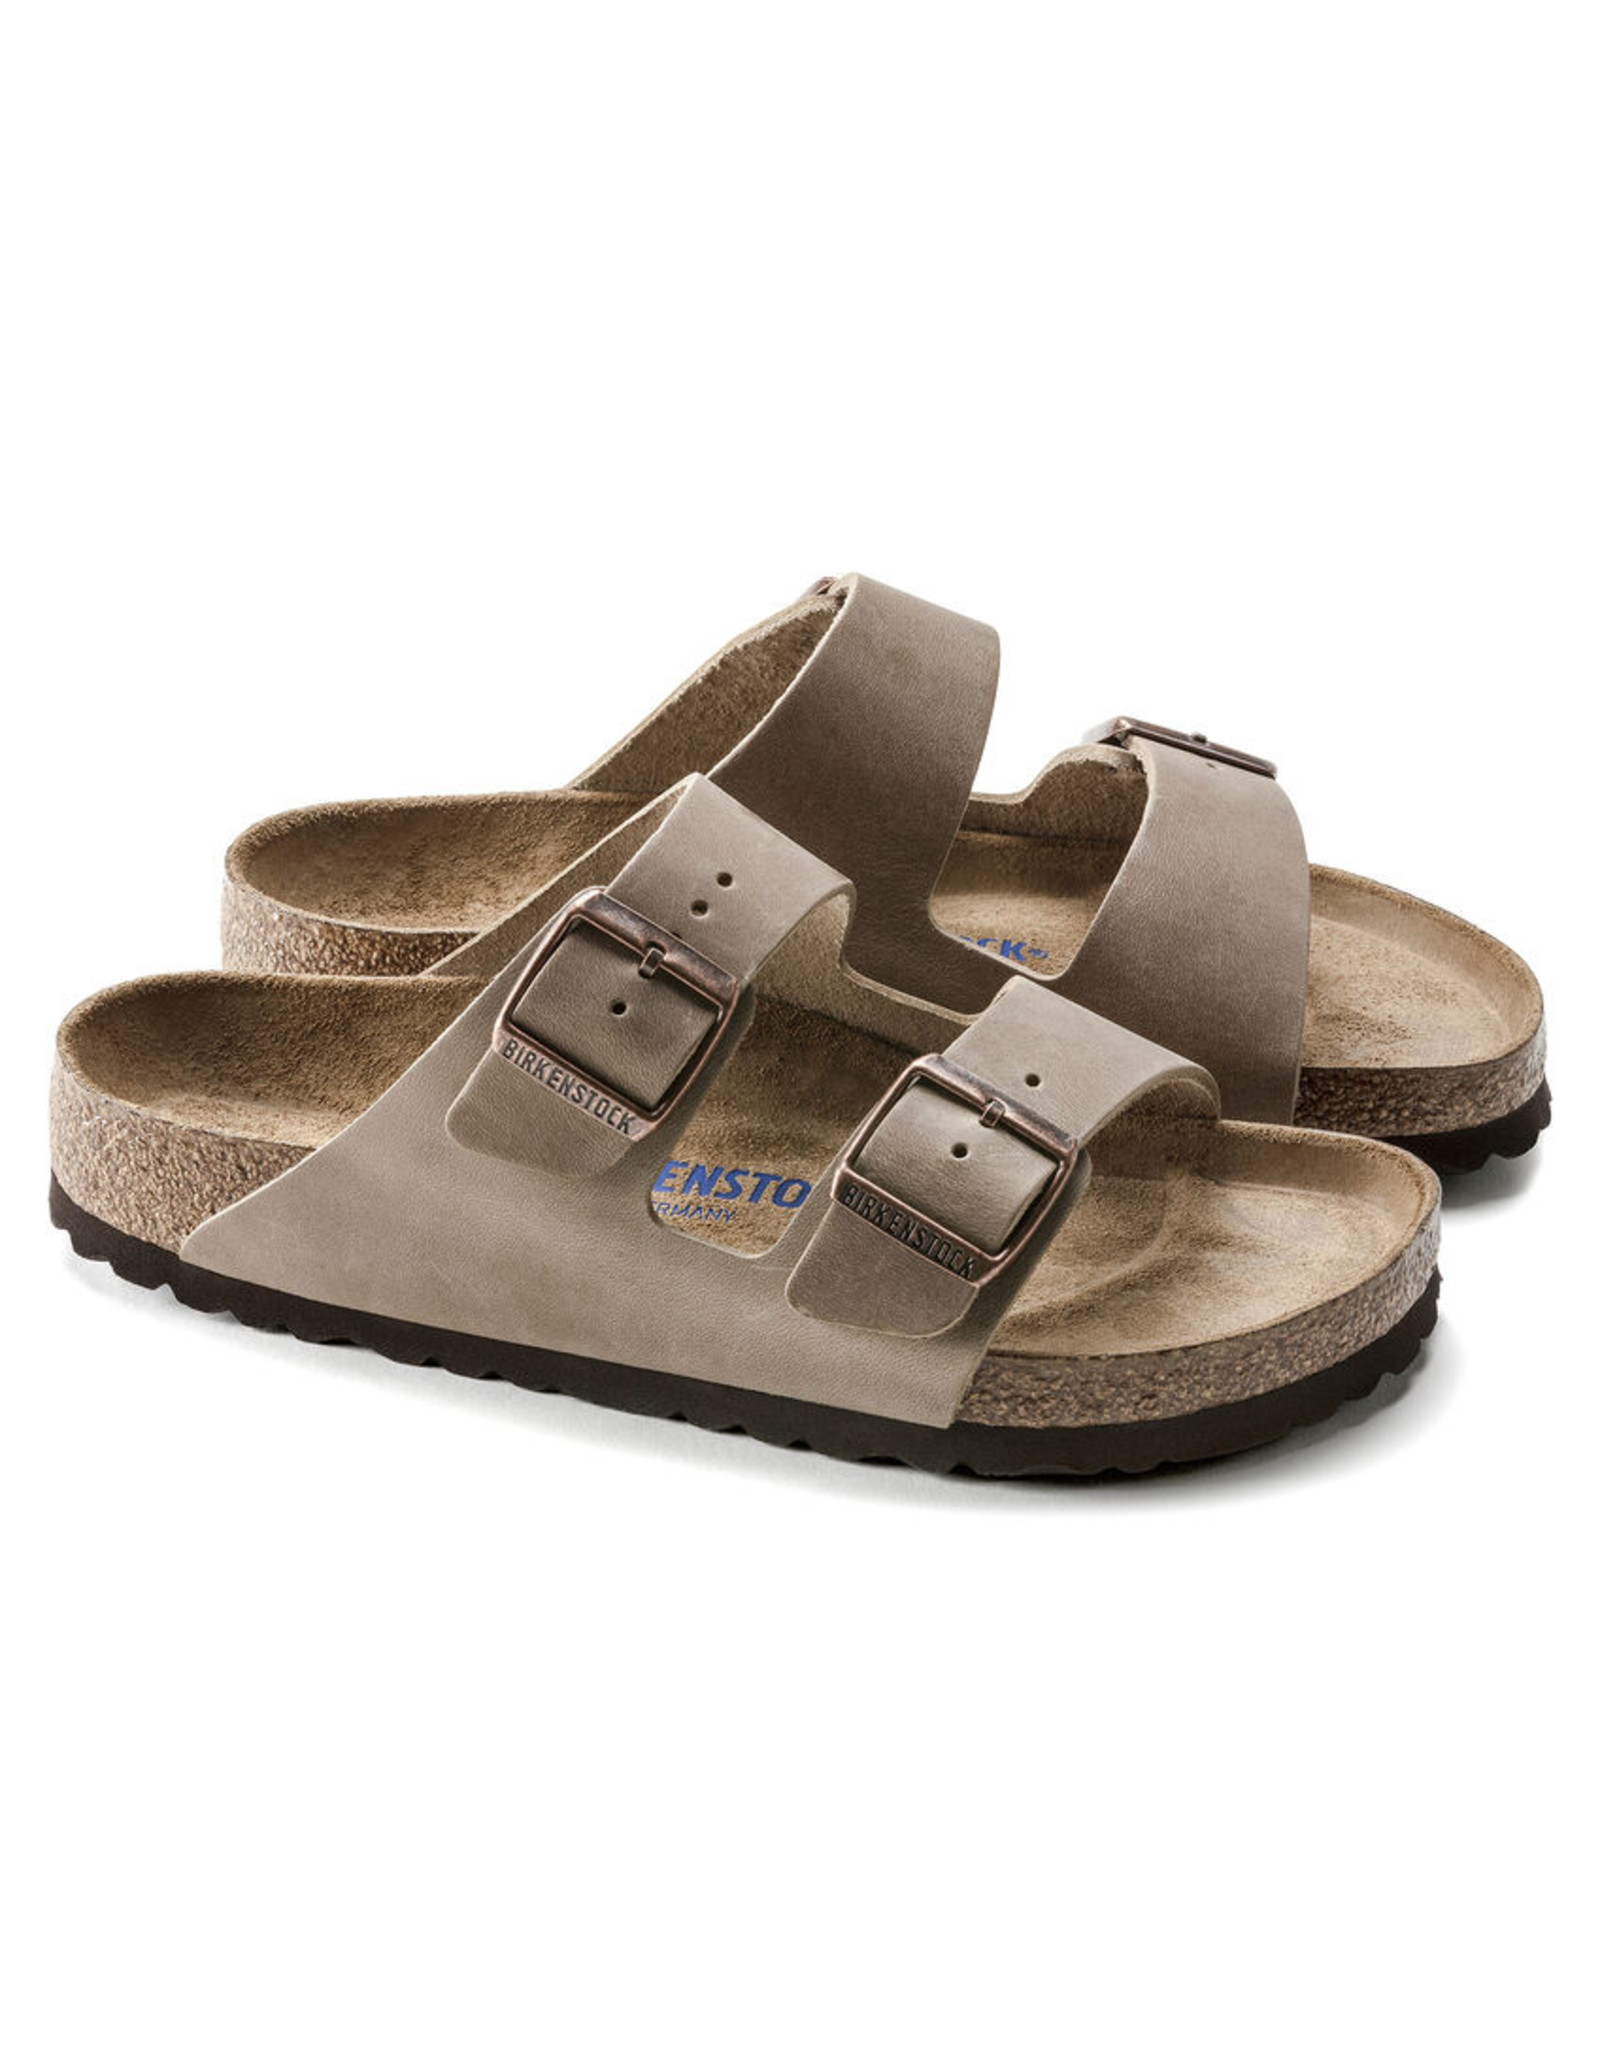 BIRKENSTOCK ARIZONA SOFT FOOTBED OILED LEATHER-TOBACCO BROWN